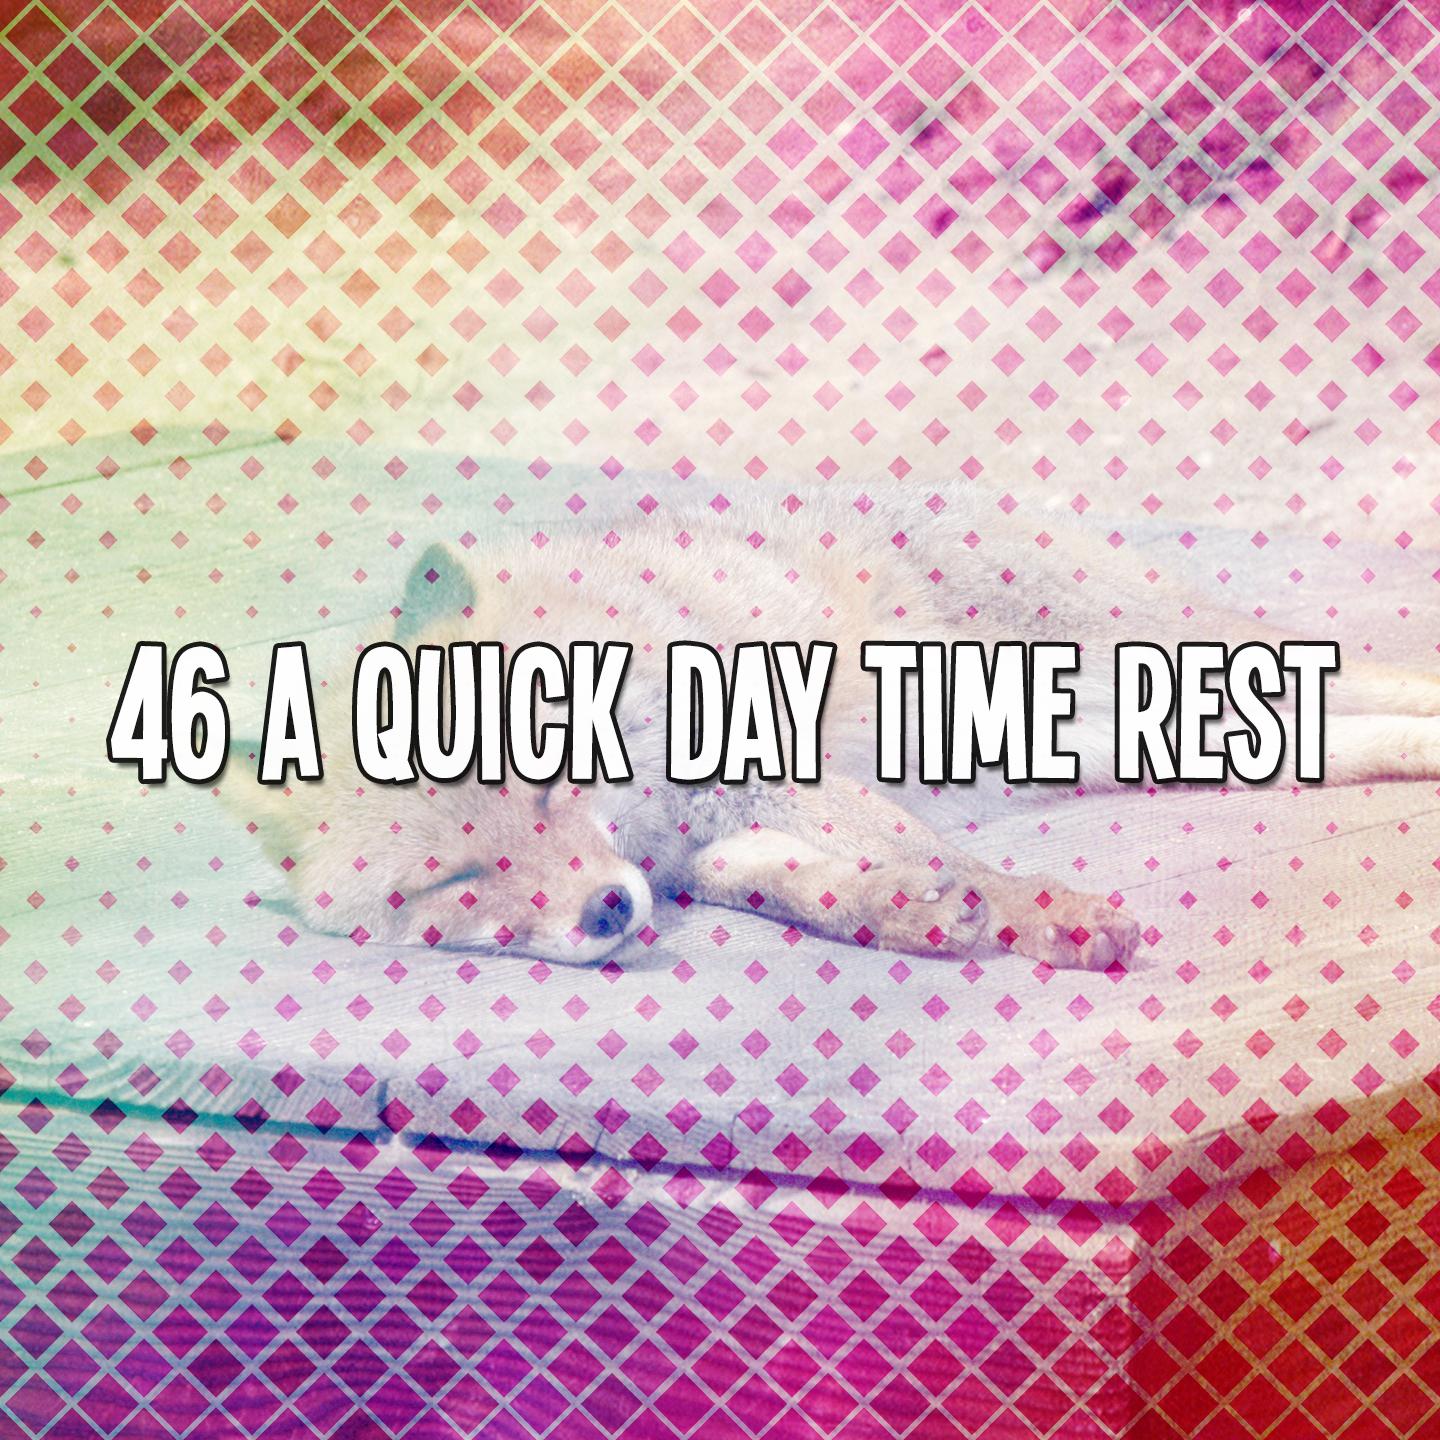 46 A Quick Day Time Rest